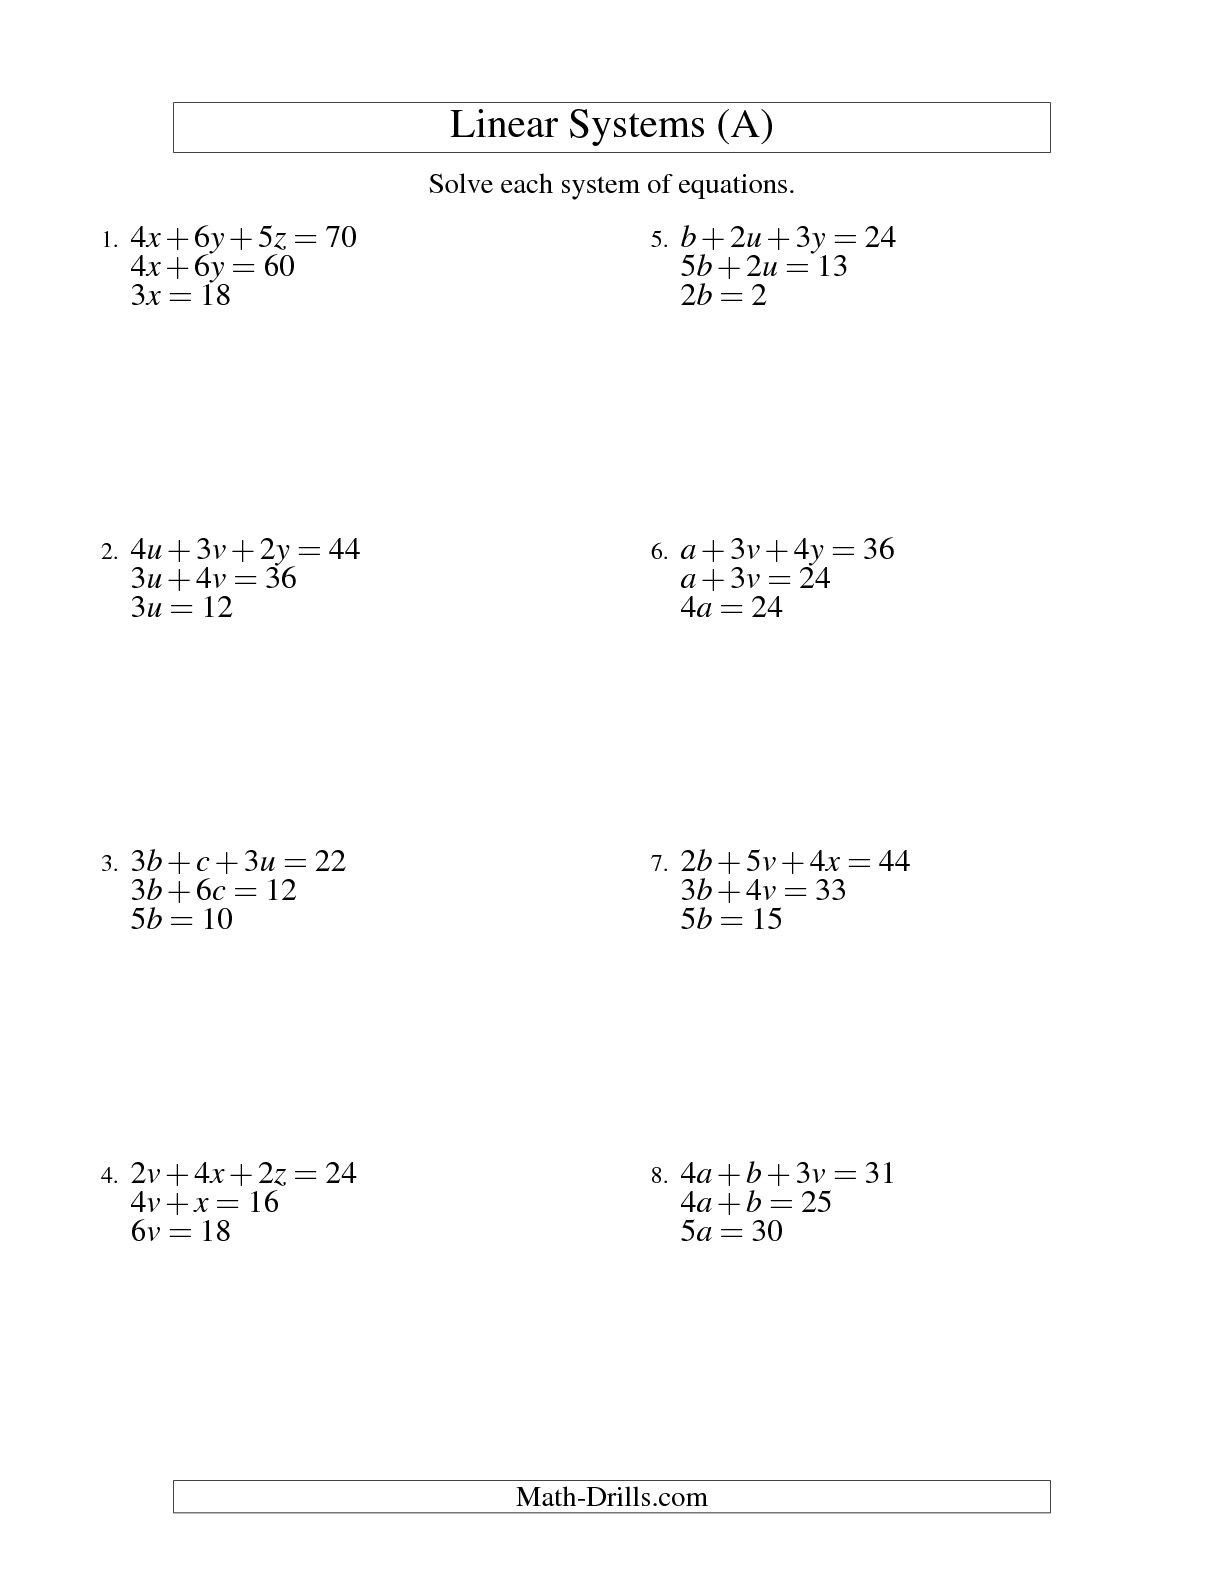 inequalities-in-two-variables-word-problems-word-problems-inequality-linear-inequalities